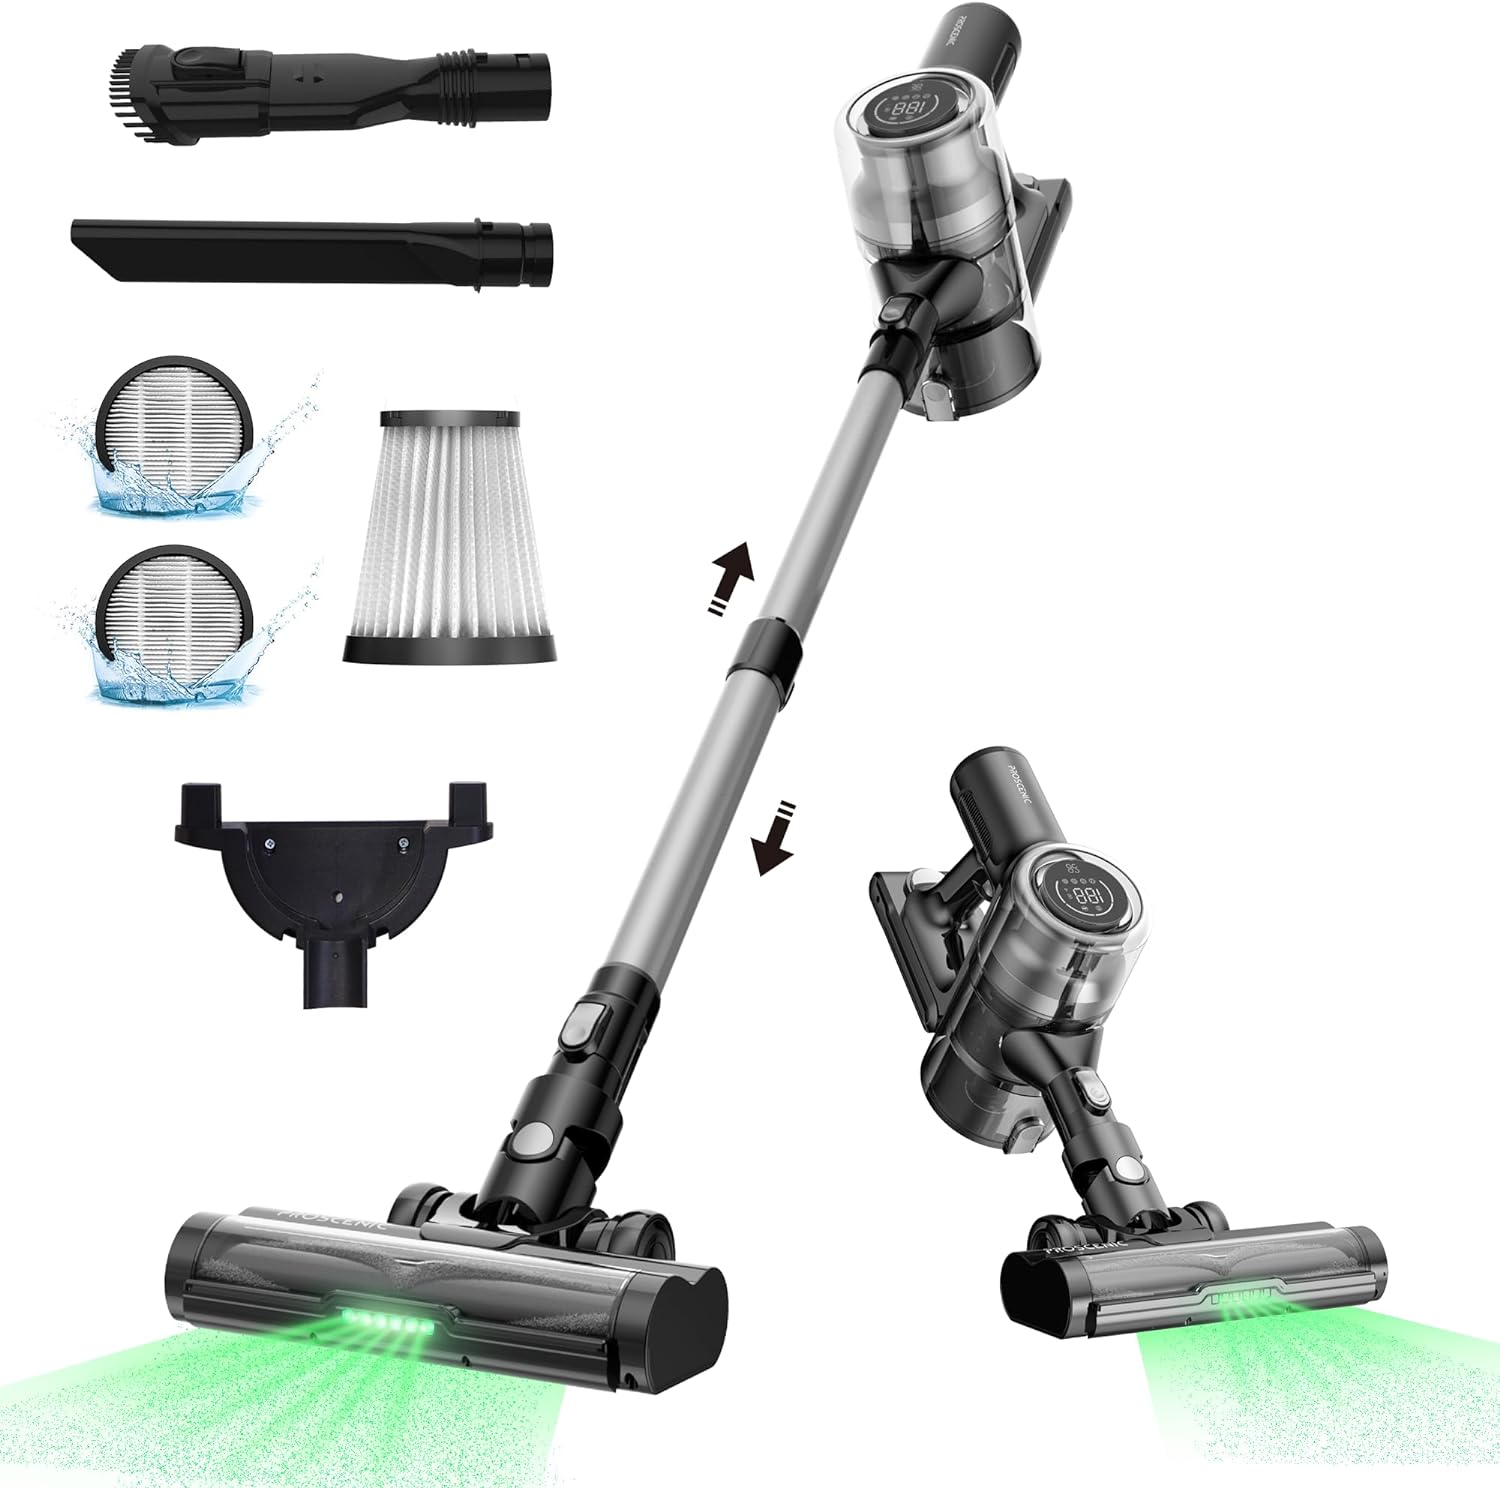 Proscenic P11 Mopping Cordless Vacuum Cleaner, 35Kpa Suction, 0.65